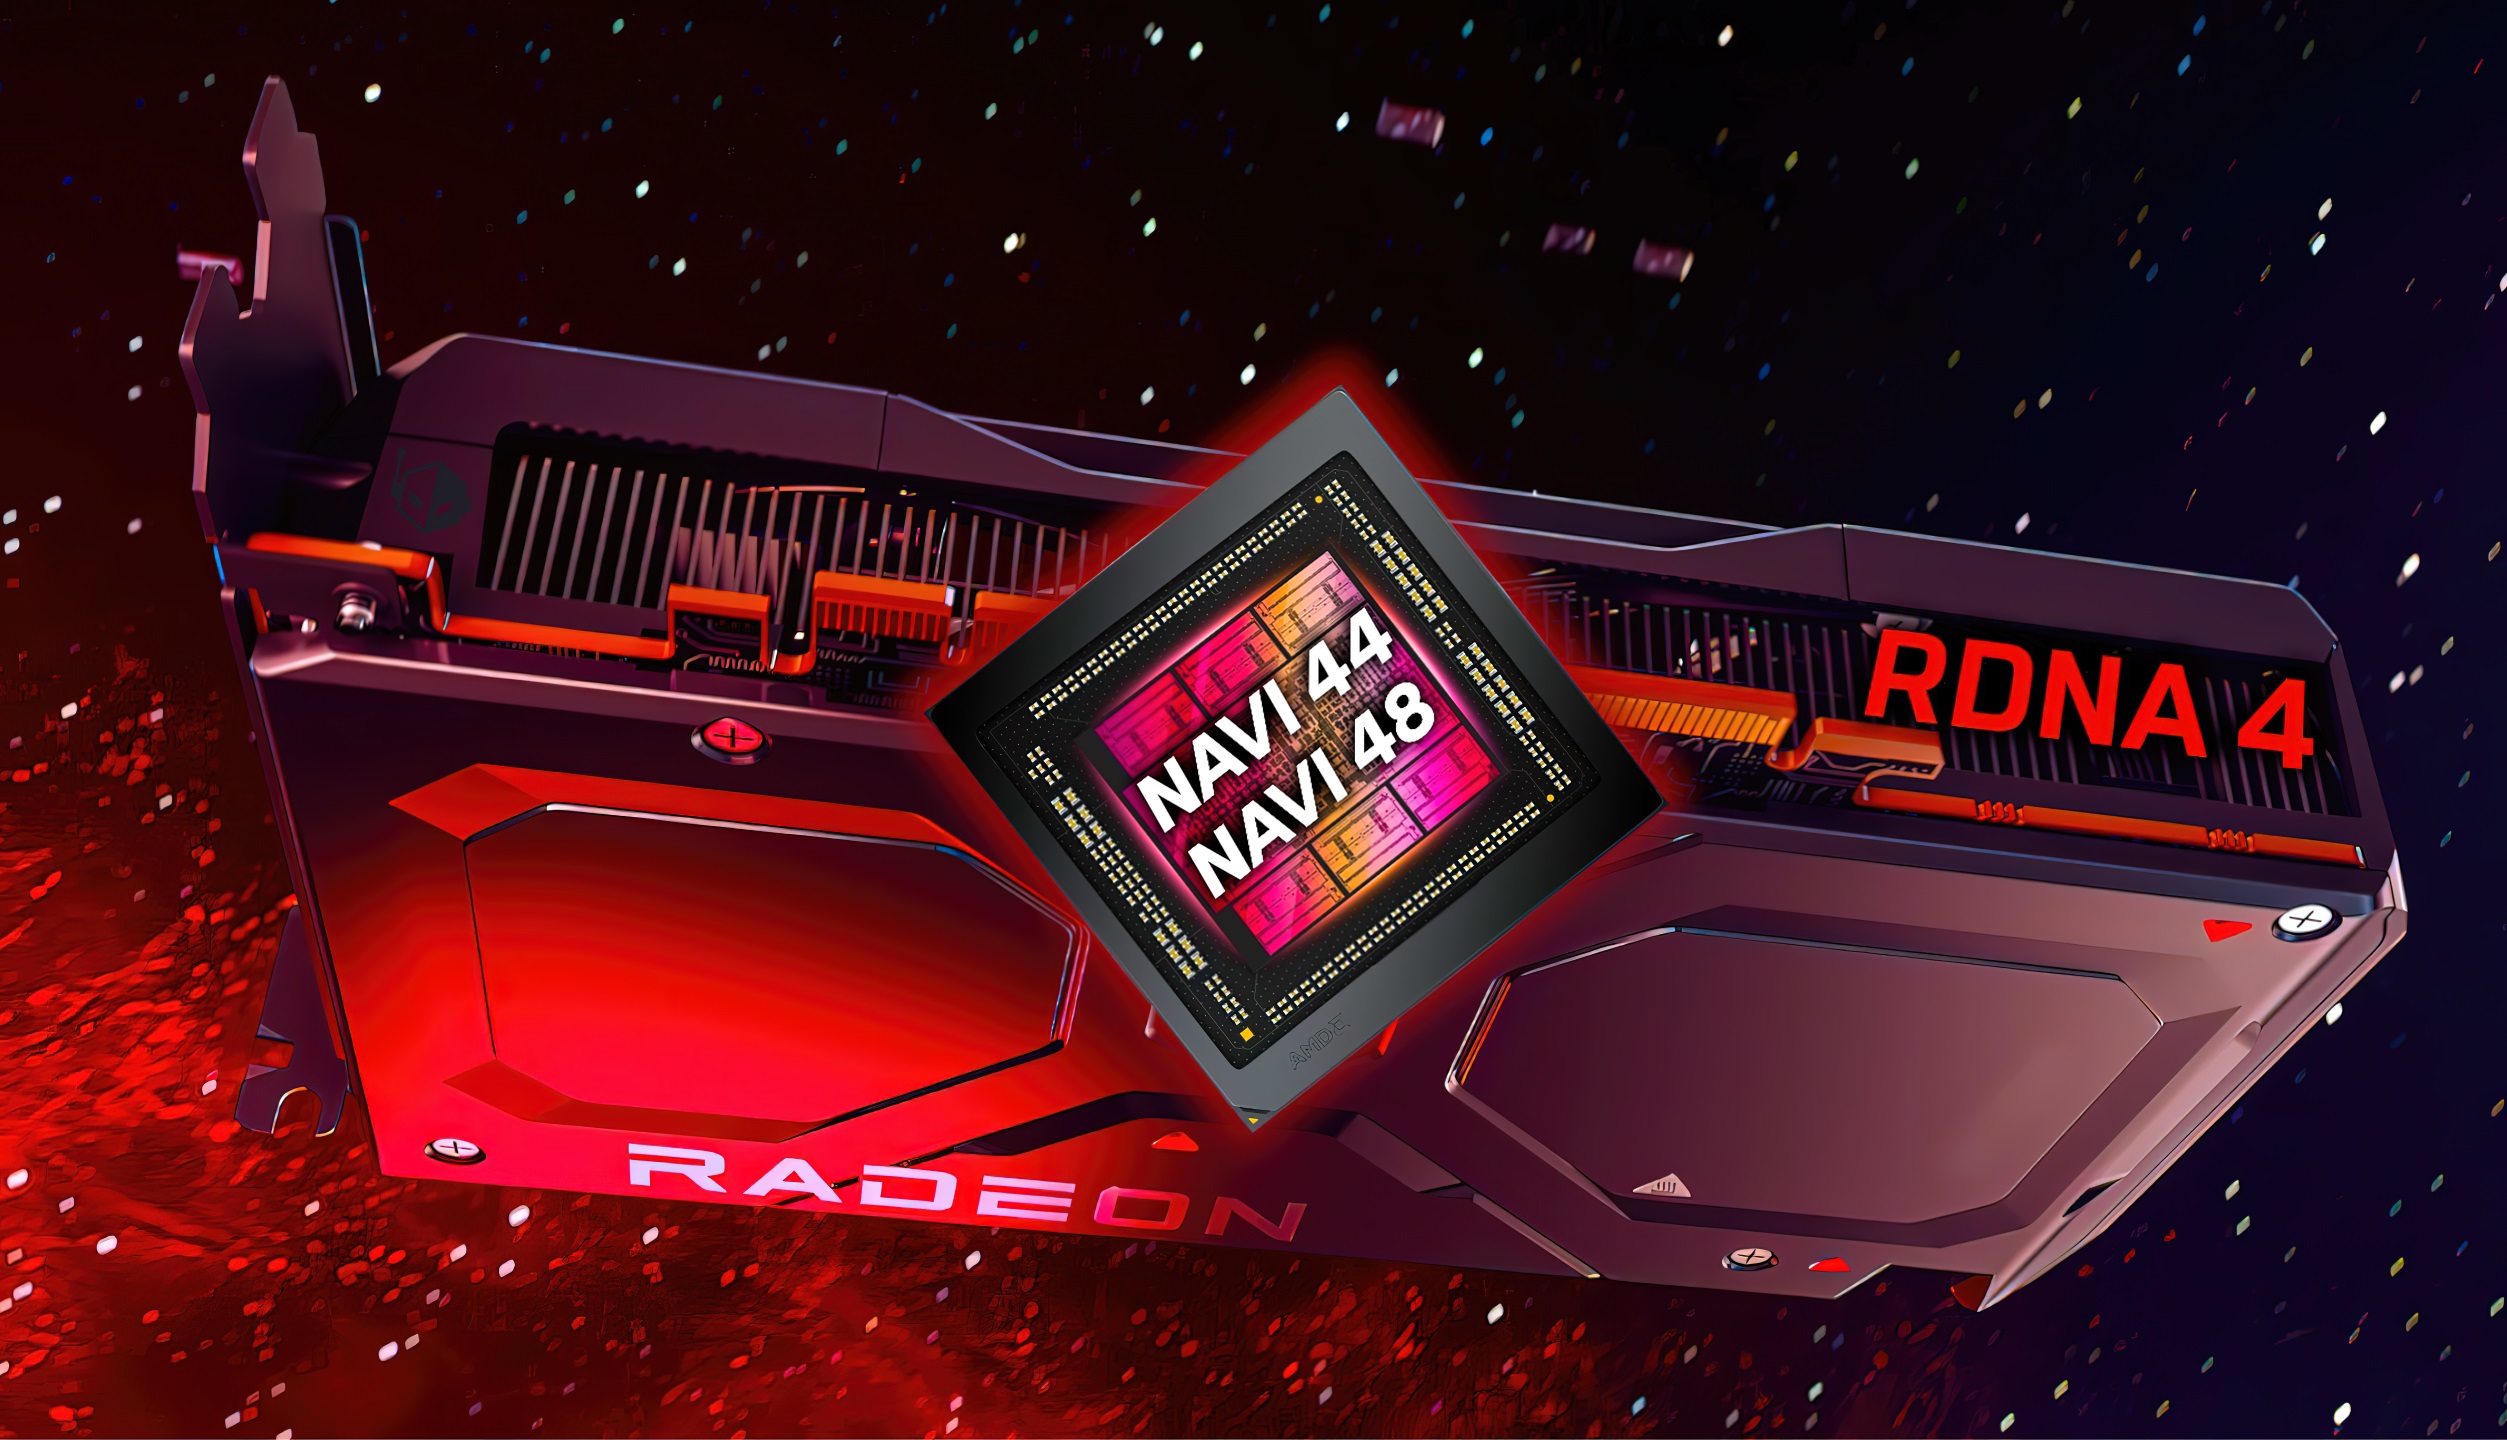 AMD RDNA 4 "Radeon RX 8000" GPUs Reportedly Debut In 2025: Navi 48 At CES & Navi 44 In Q2 1